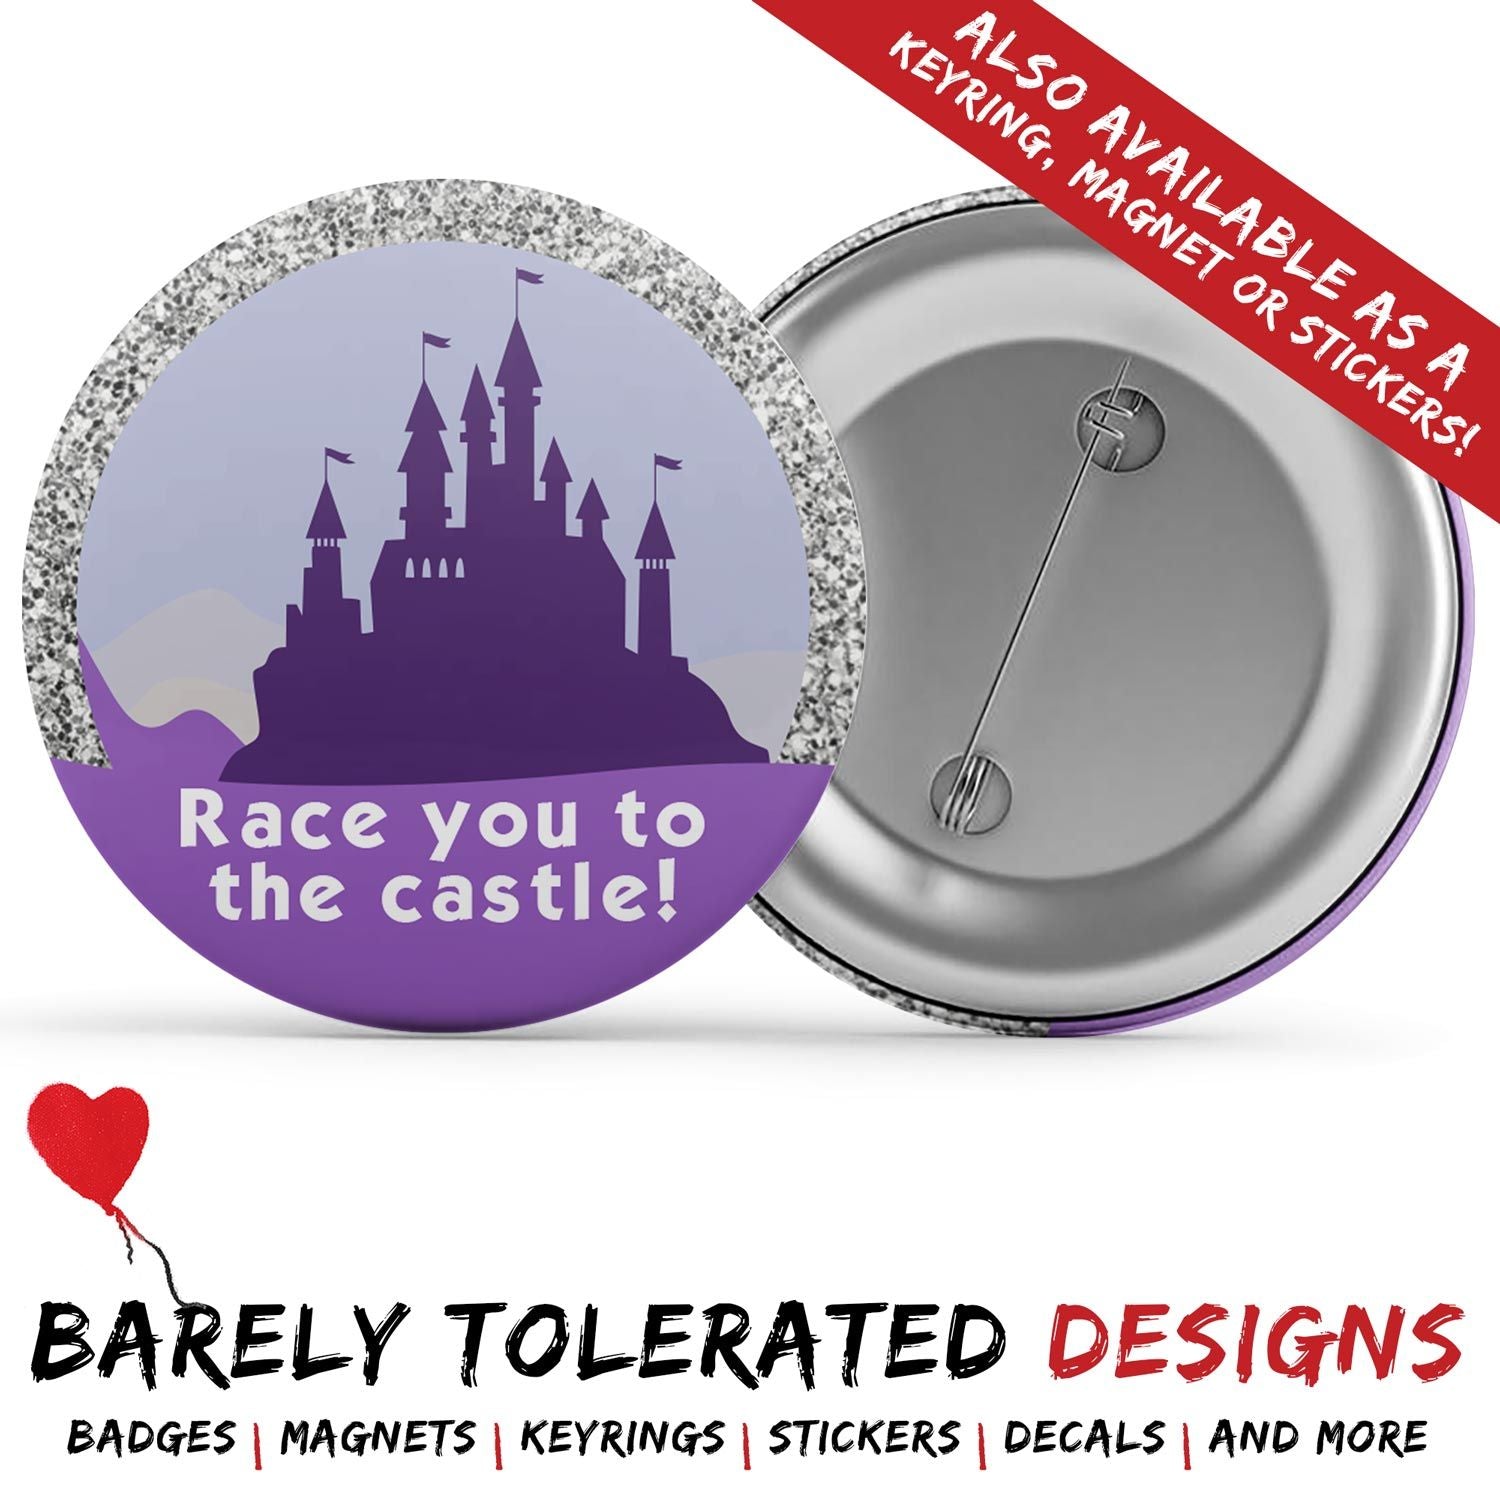 Race you to the castle! Image